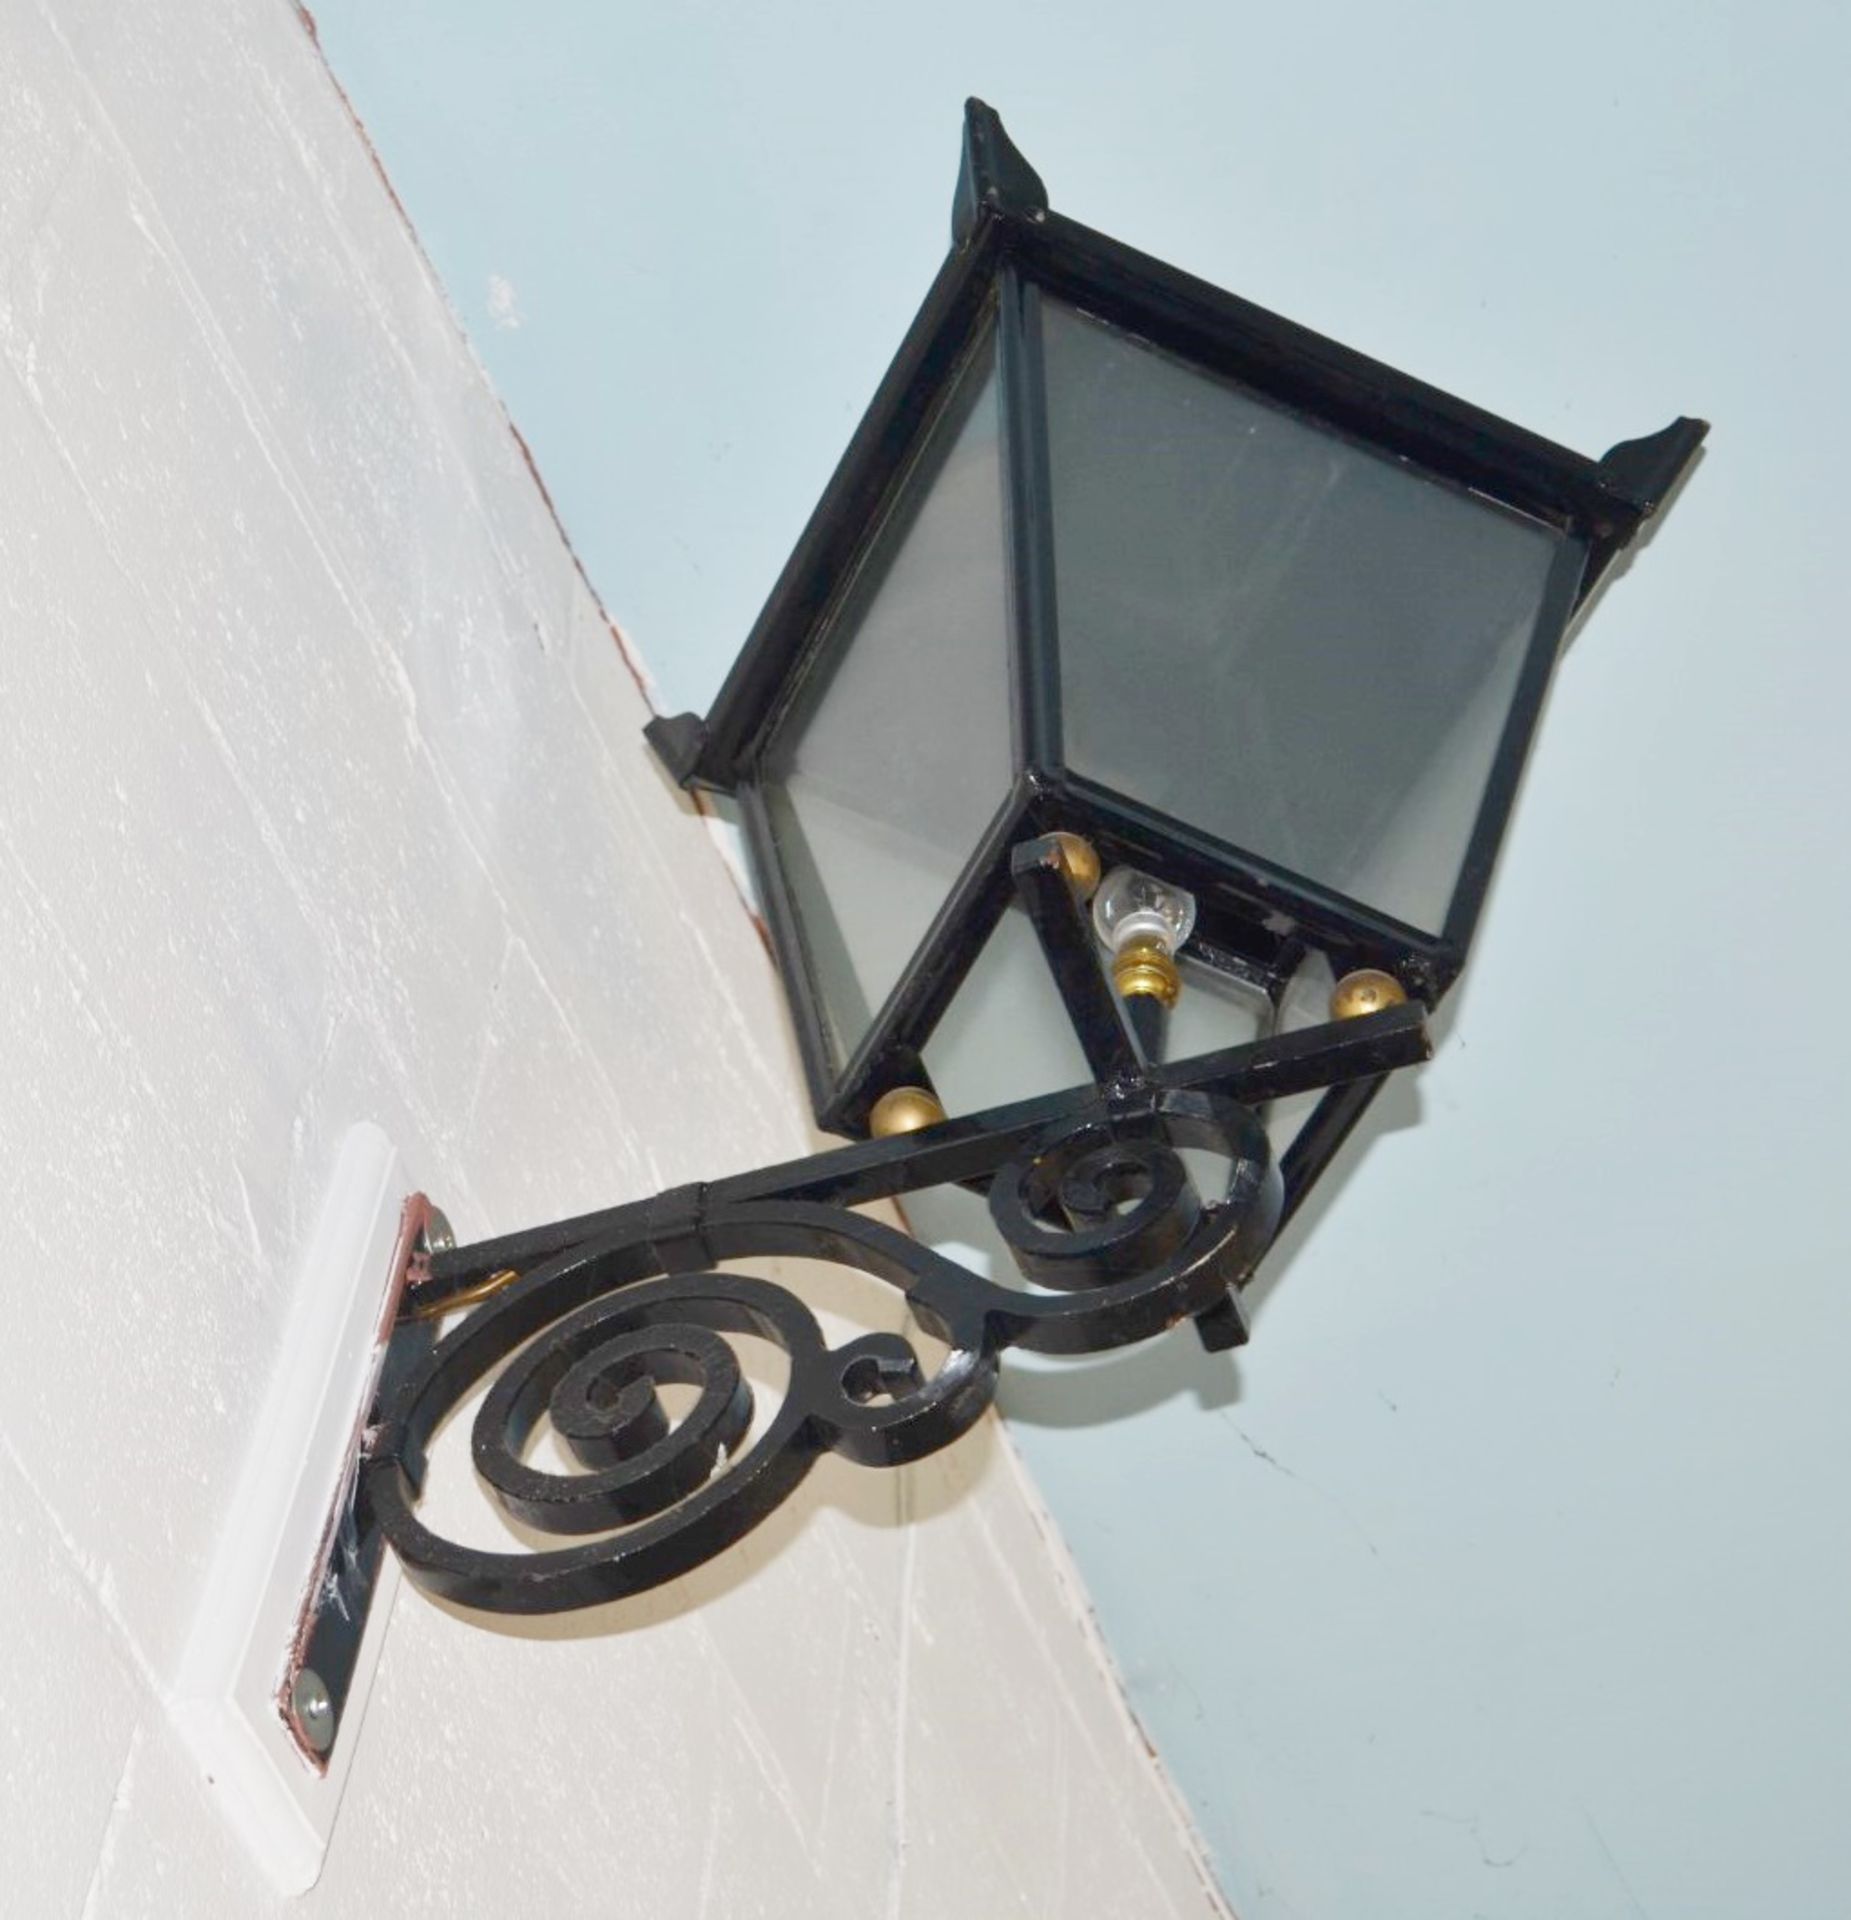 1 x Victorian Style Wall Lantern Light Fitting - Large Size in Black - Overal Height Approx 90 cms -